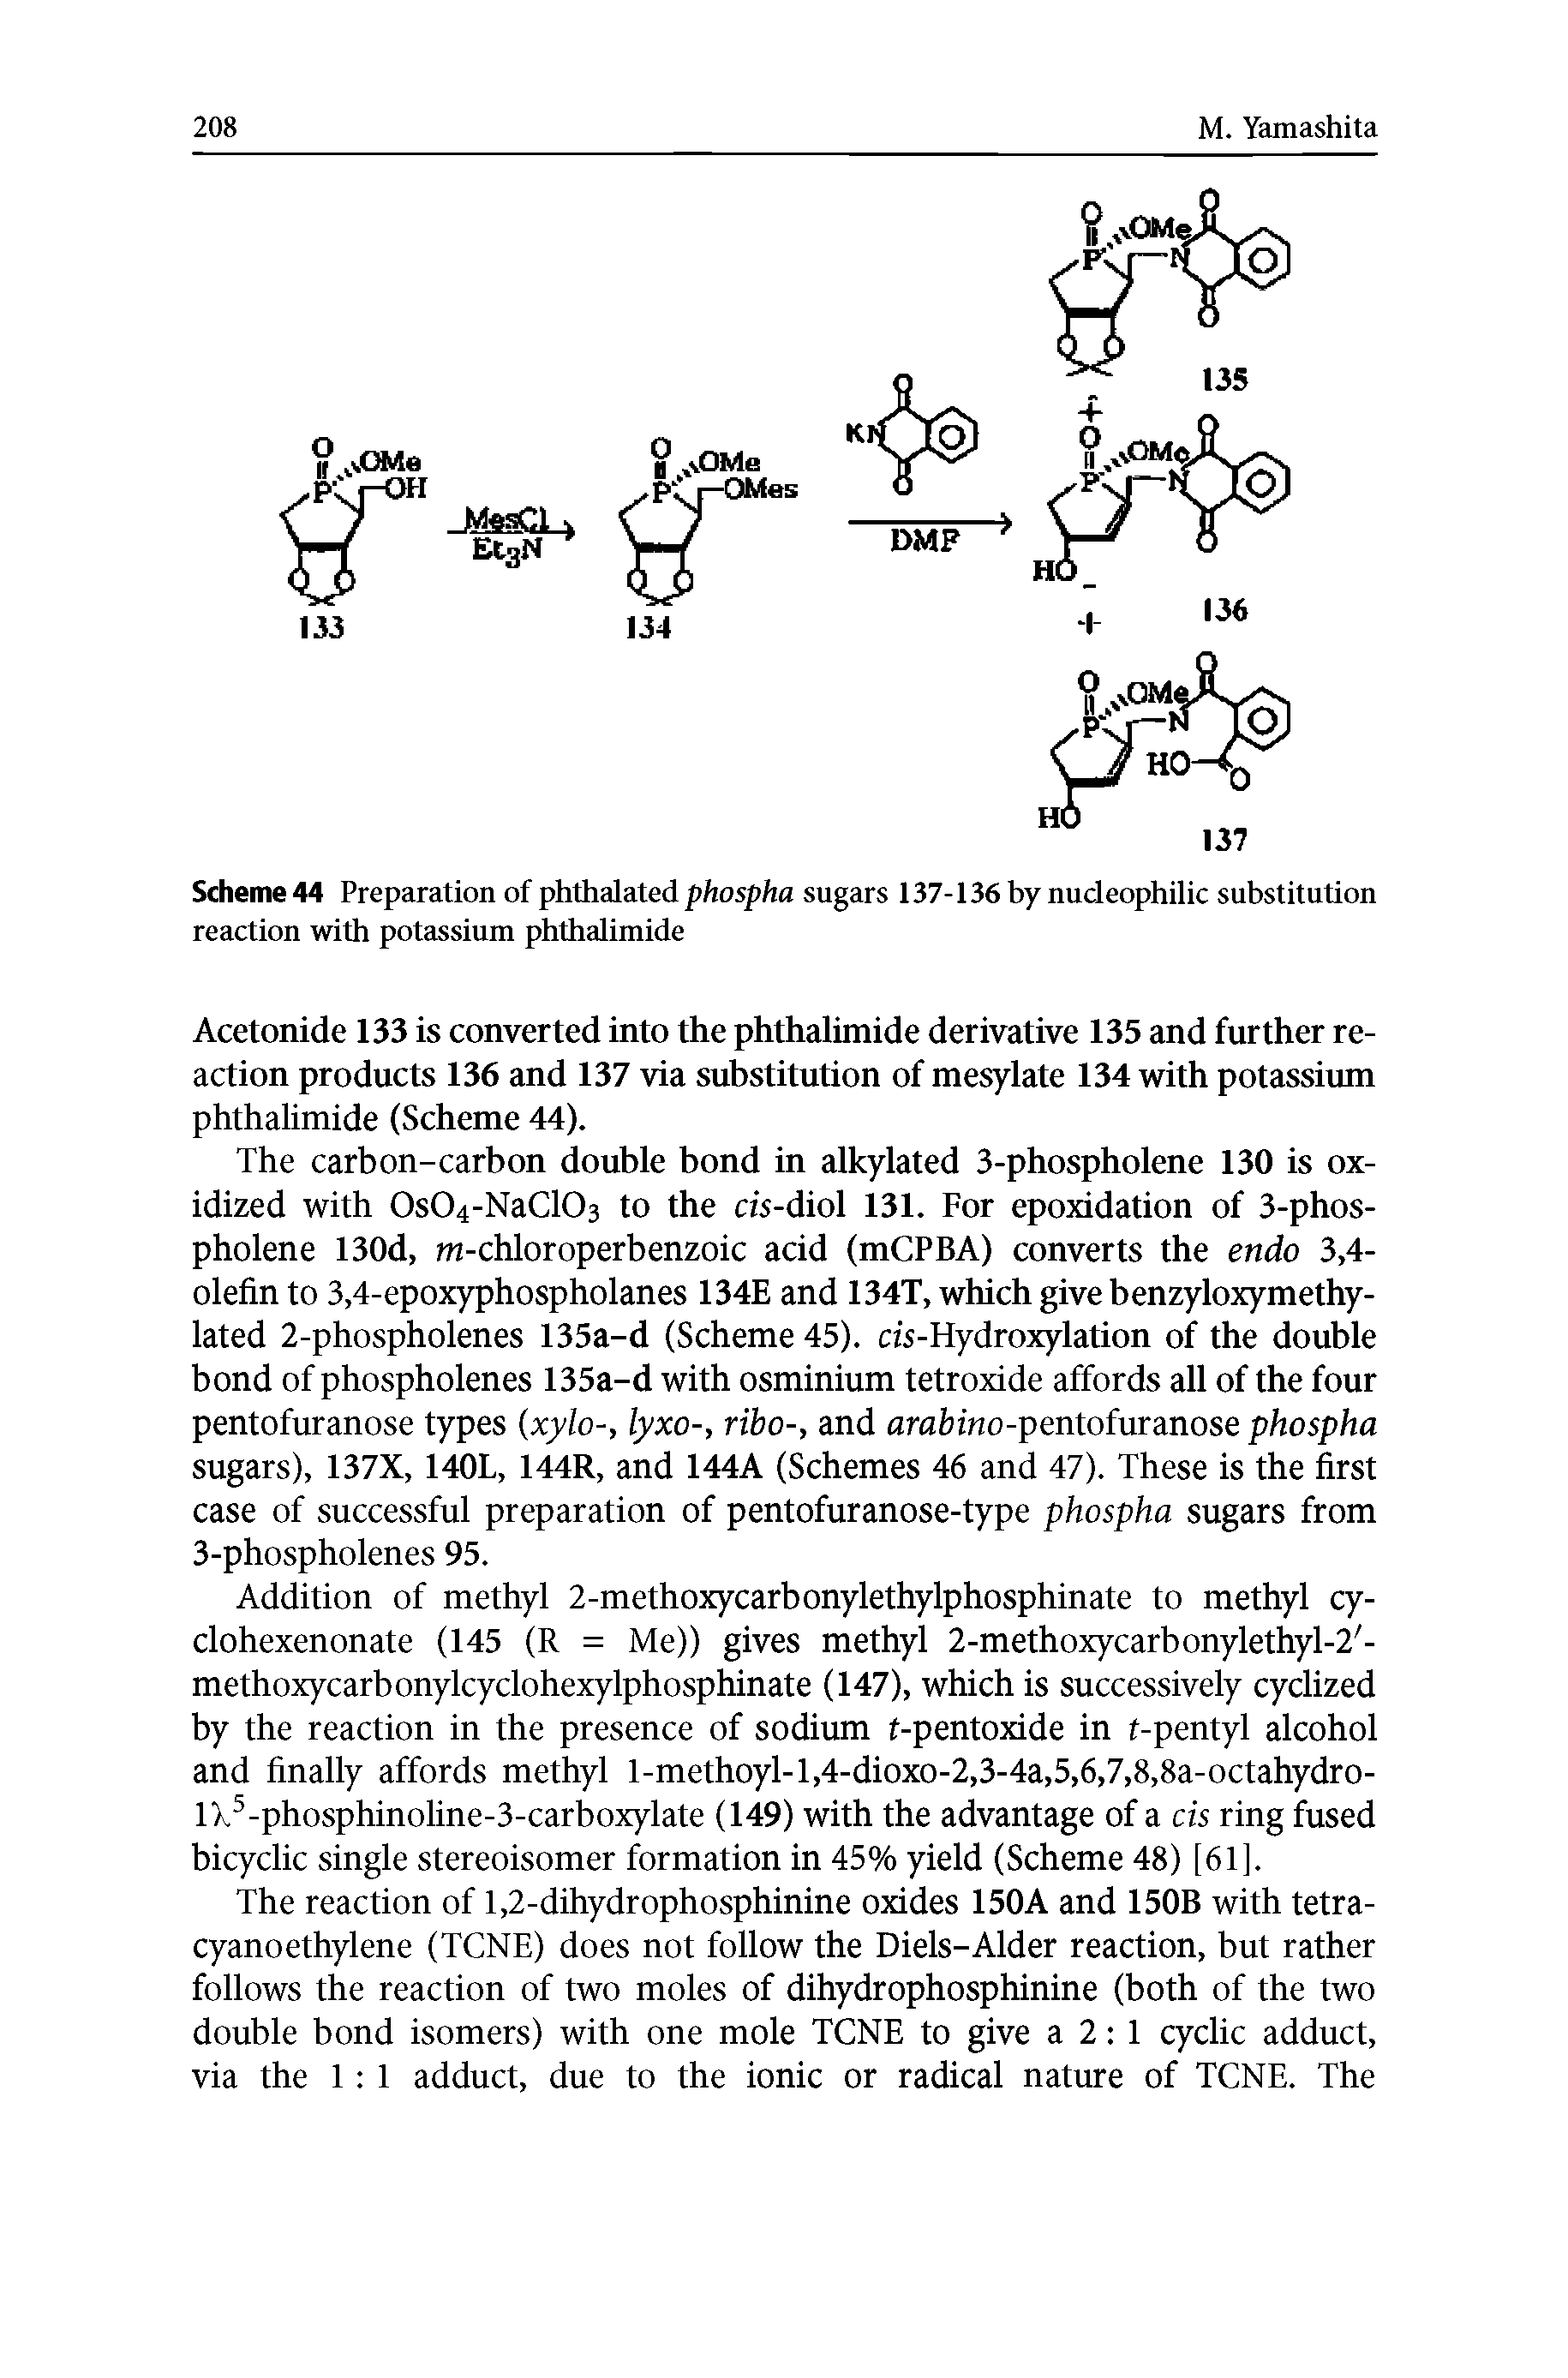 Scheme 44 Preparation of phthalated phospha sugars 137-136 by nucleophilic substitution reaction with potassium phthalimide...